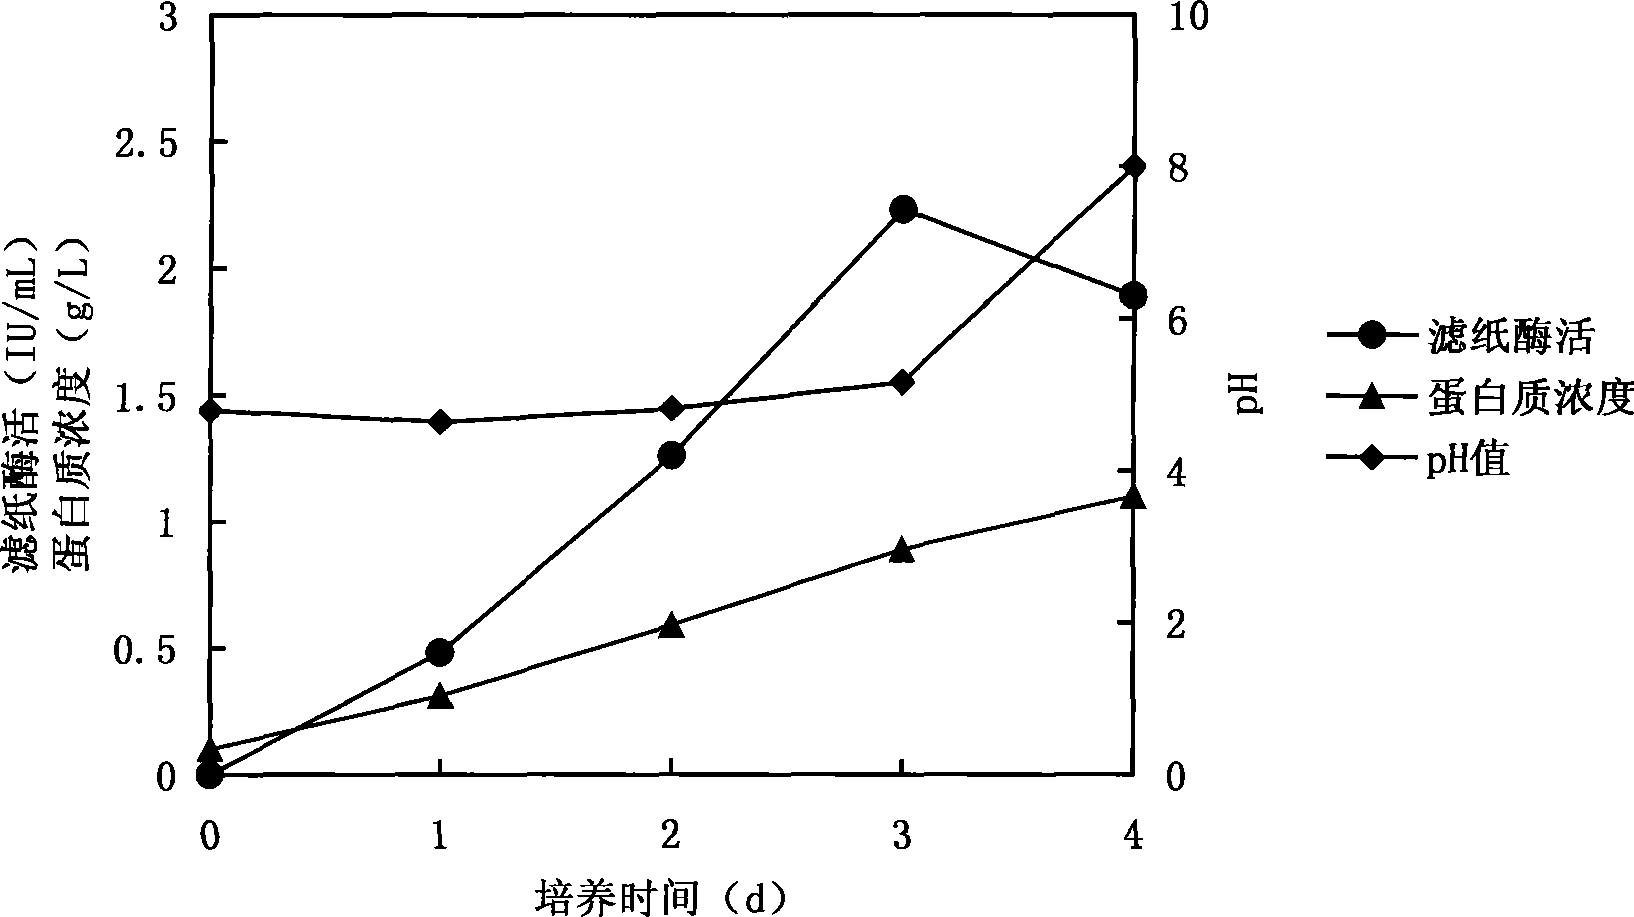 Method for promoting cellulolytic enzymes synthesis of trichoderma reesei by using dilute sulfuric acid treated pulp as carbon source